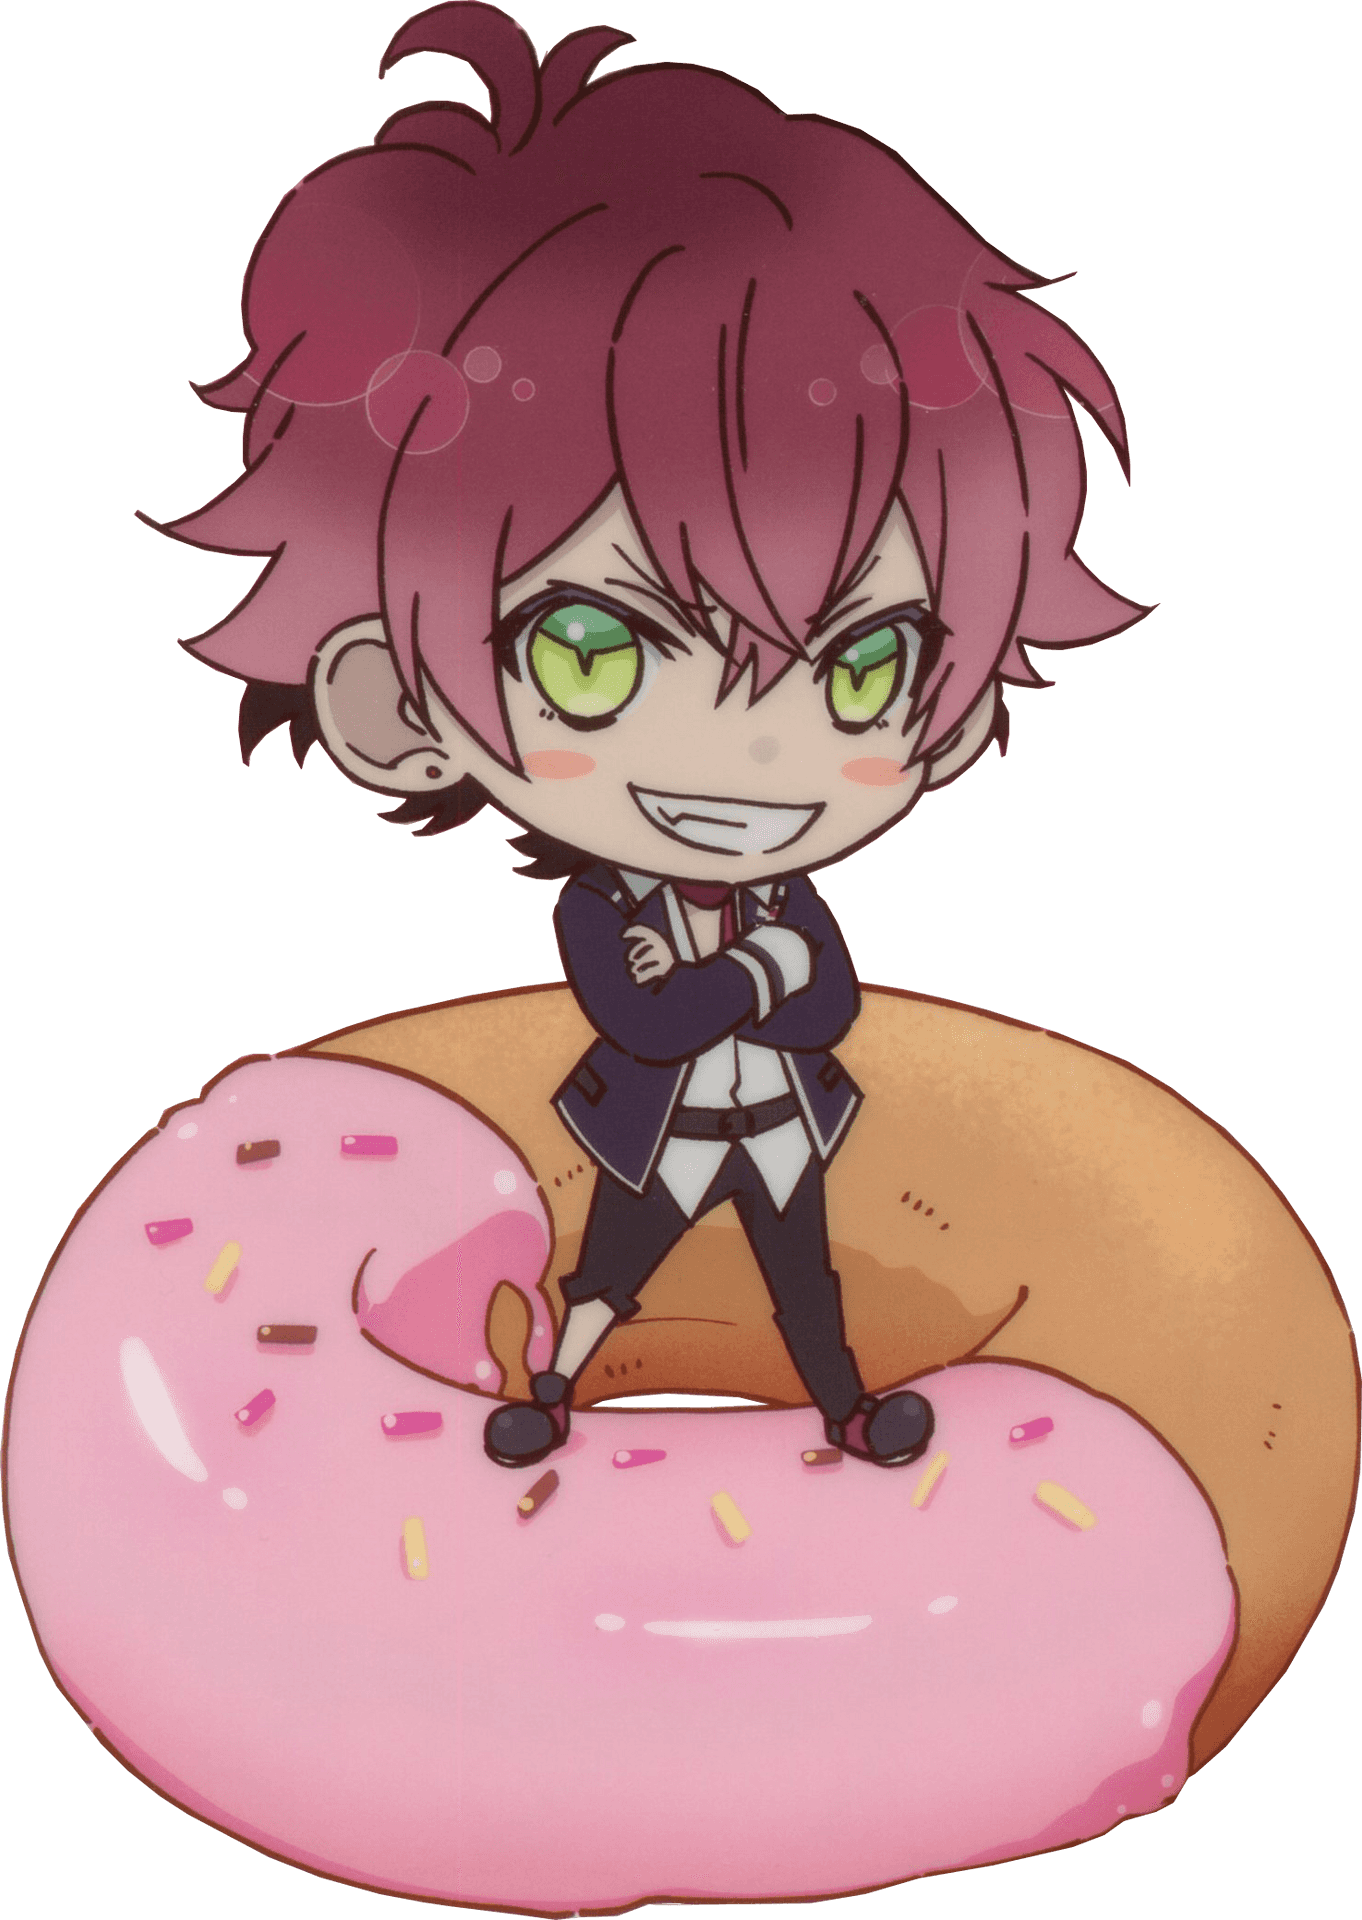 Chibi Character On Donut Illustration PNG